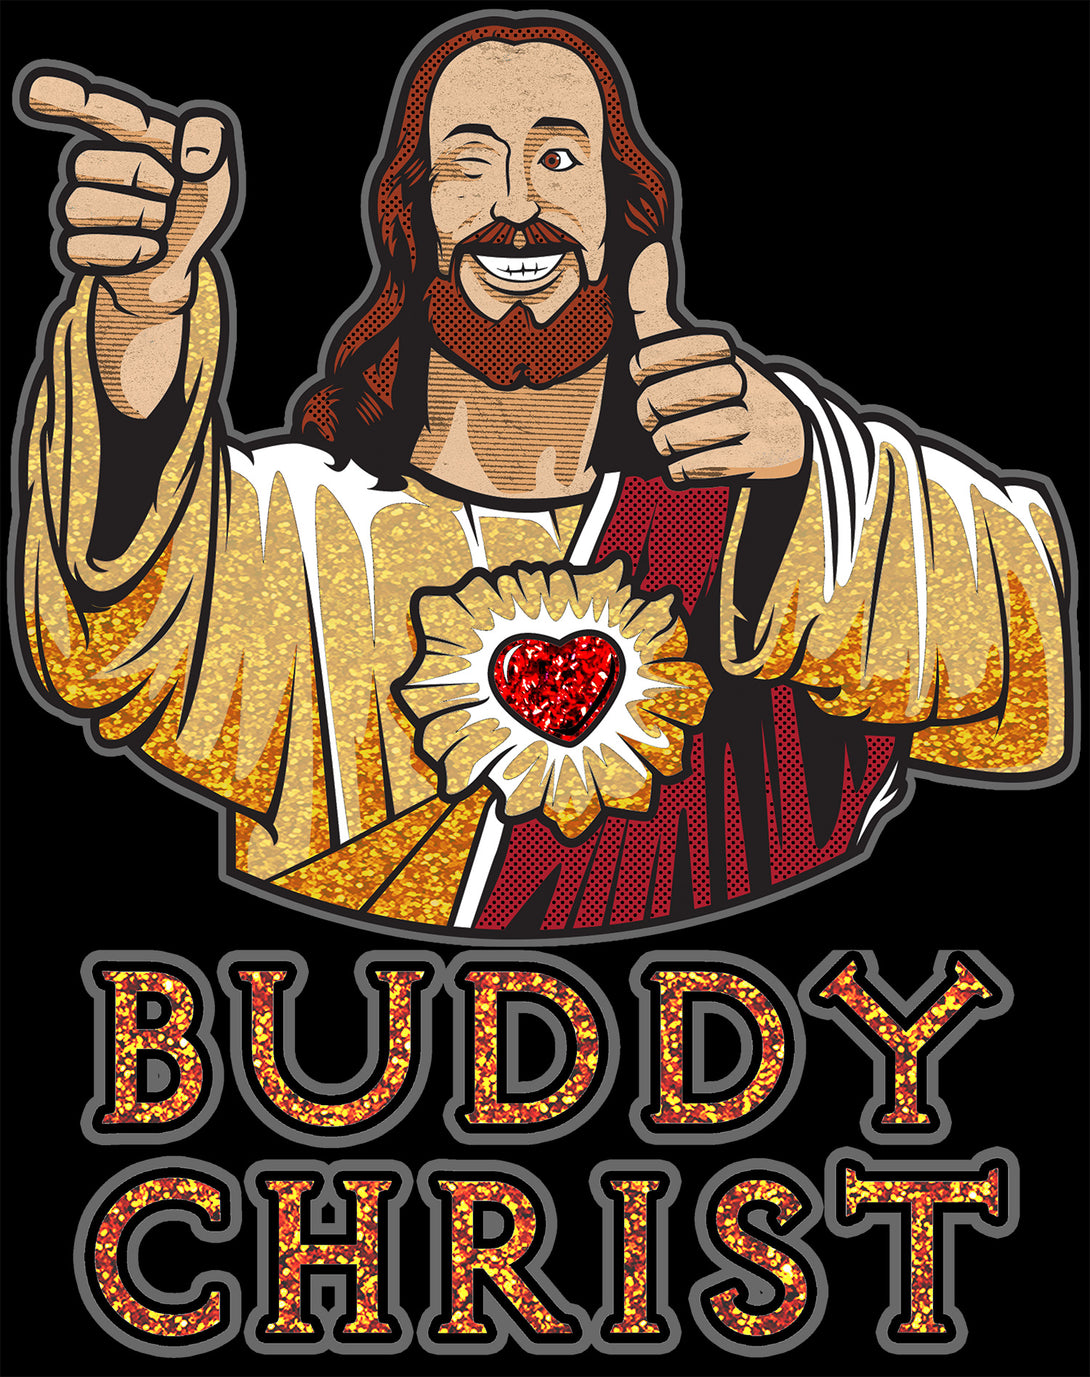 Kevin Smith View Askewniverse Buddy Christ Got Golden Wow Edition Official Men's T-Shirt Black - Urban Species Design Close Up